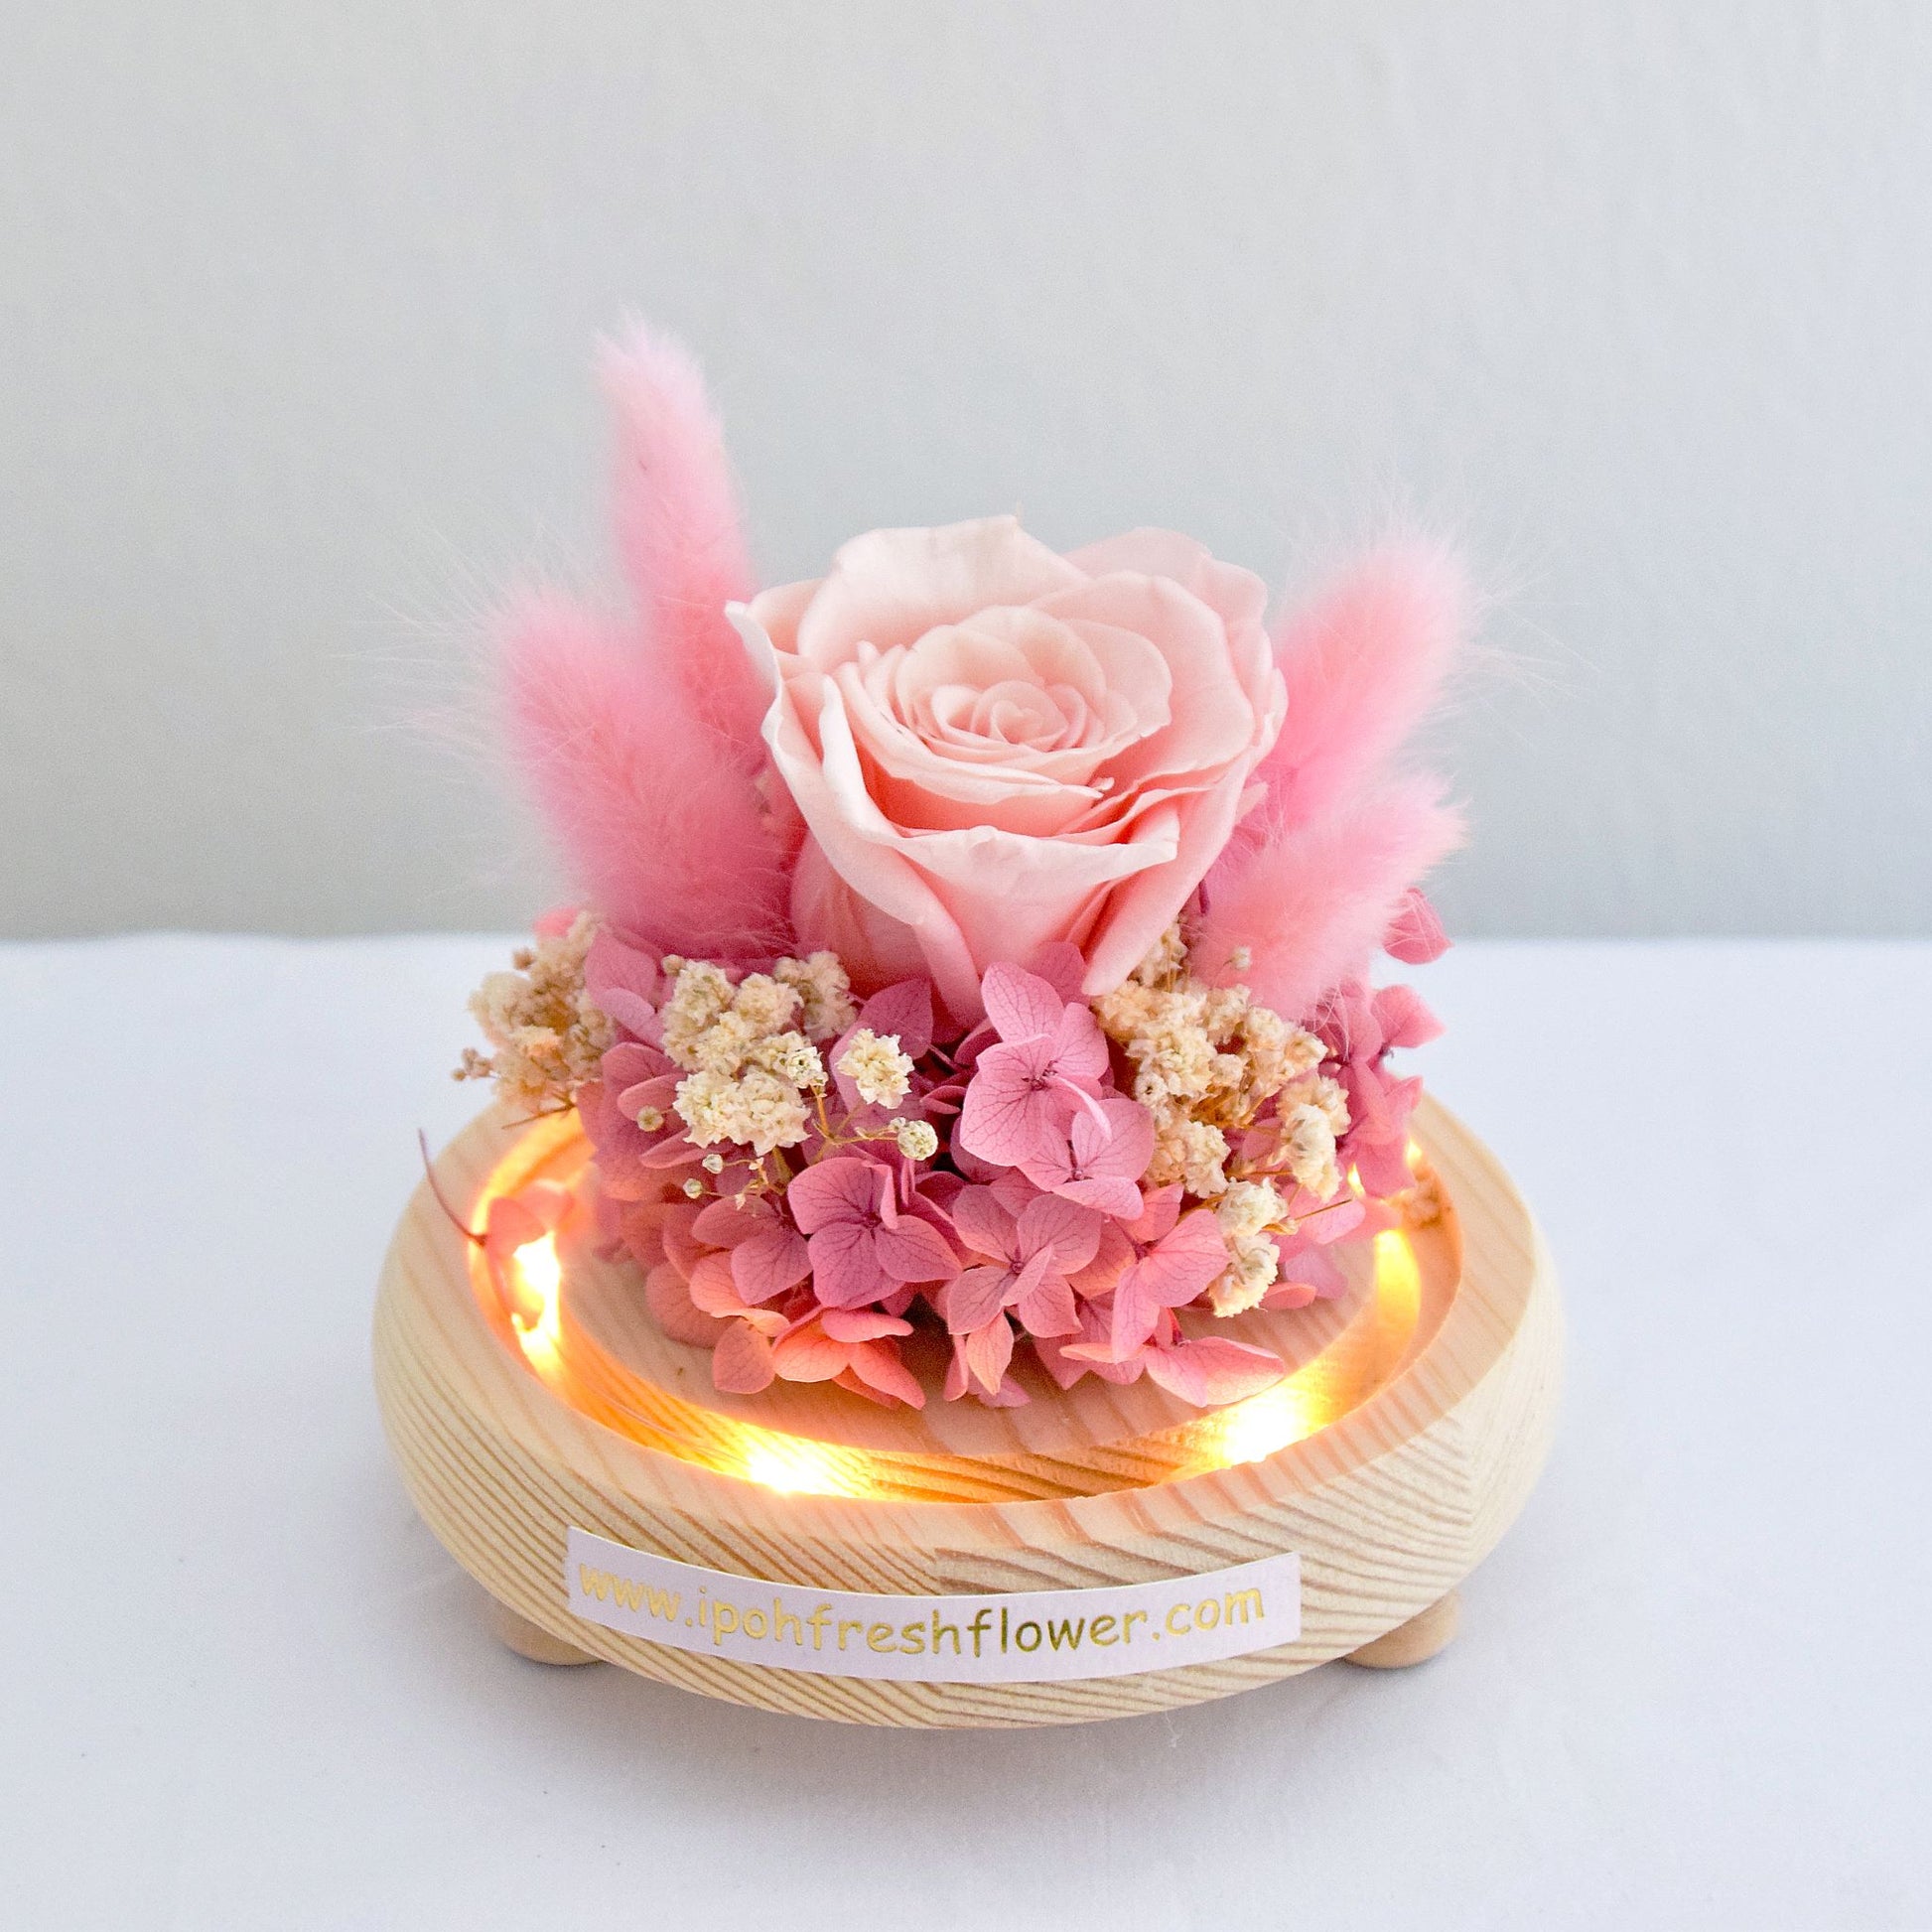 Diane Preserved Flower Globe| Preserved Flowers Gift Delivery